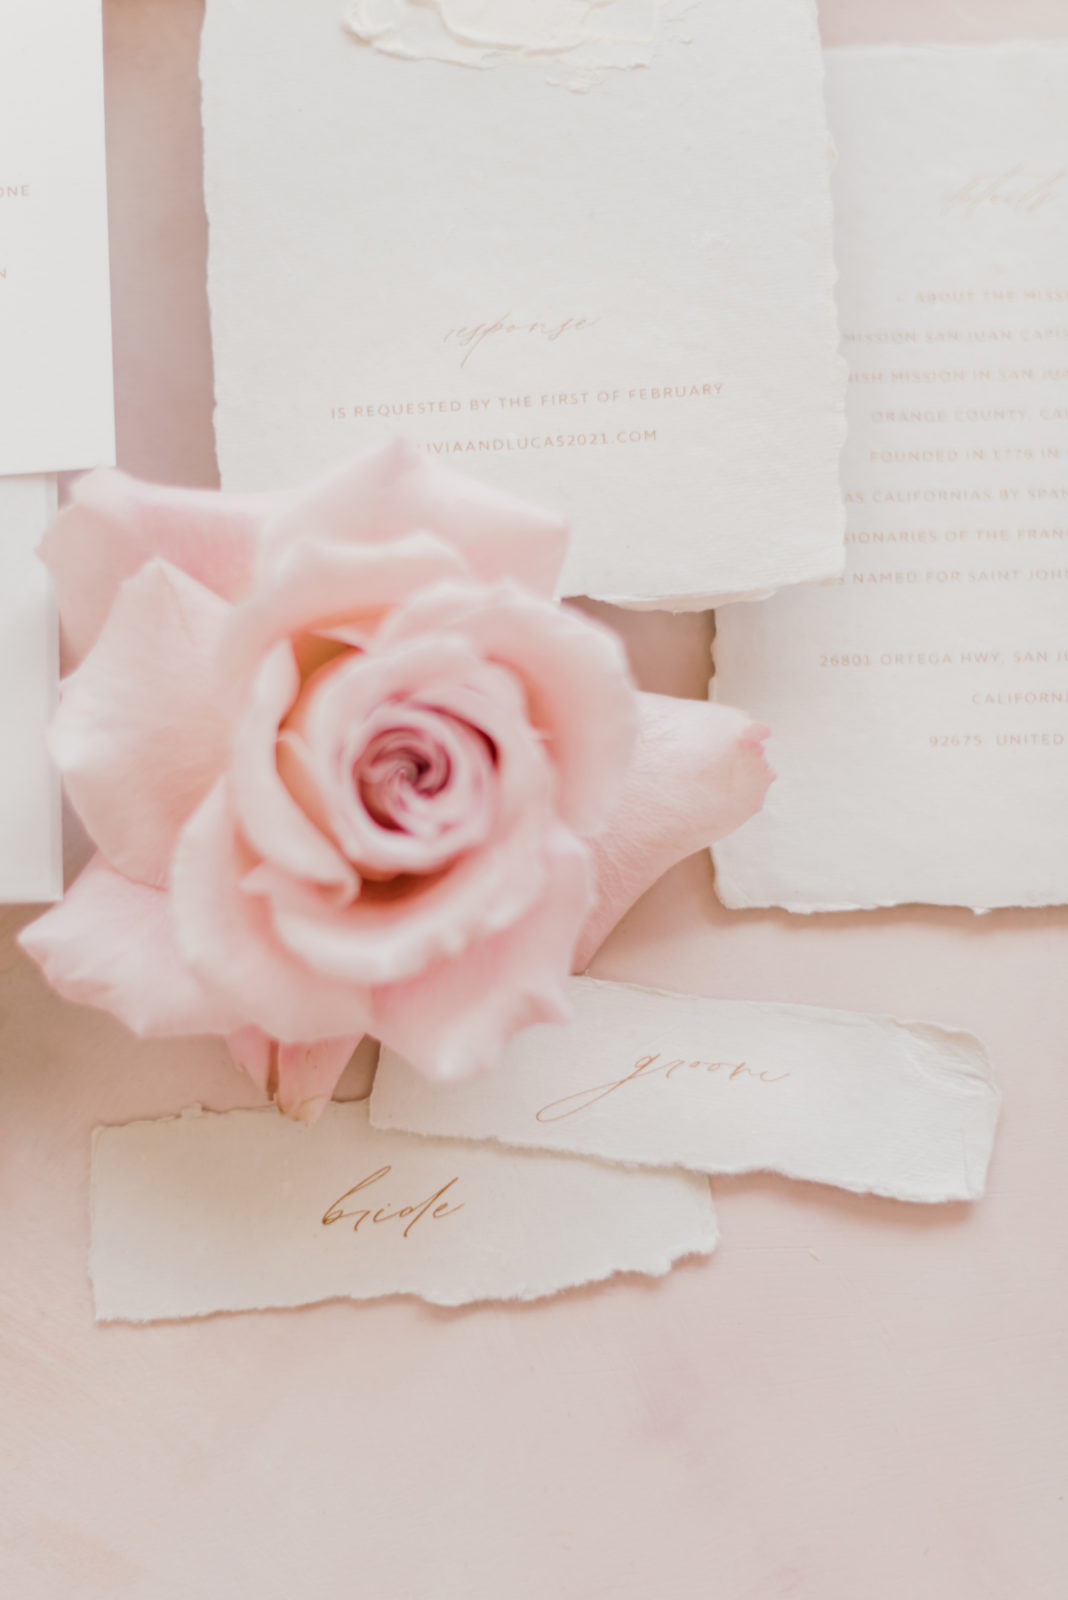 Delicate and feminine wedding stationery with a pink garden rose